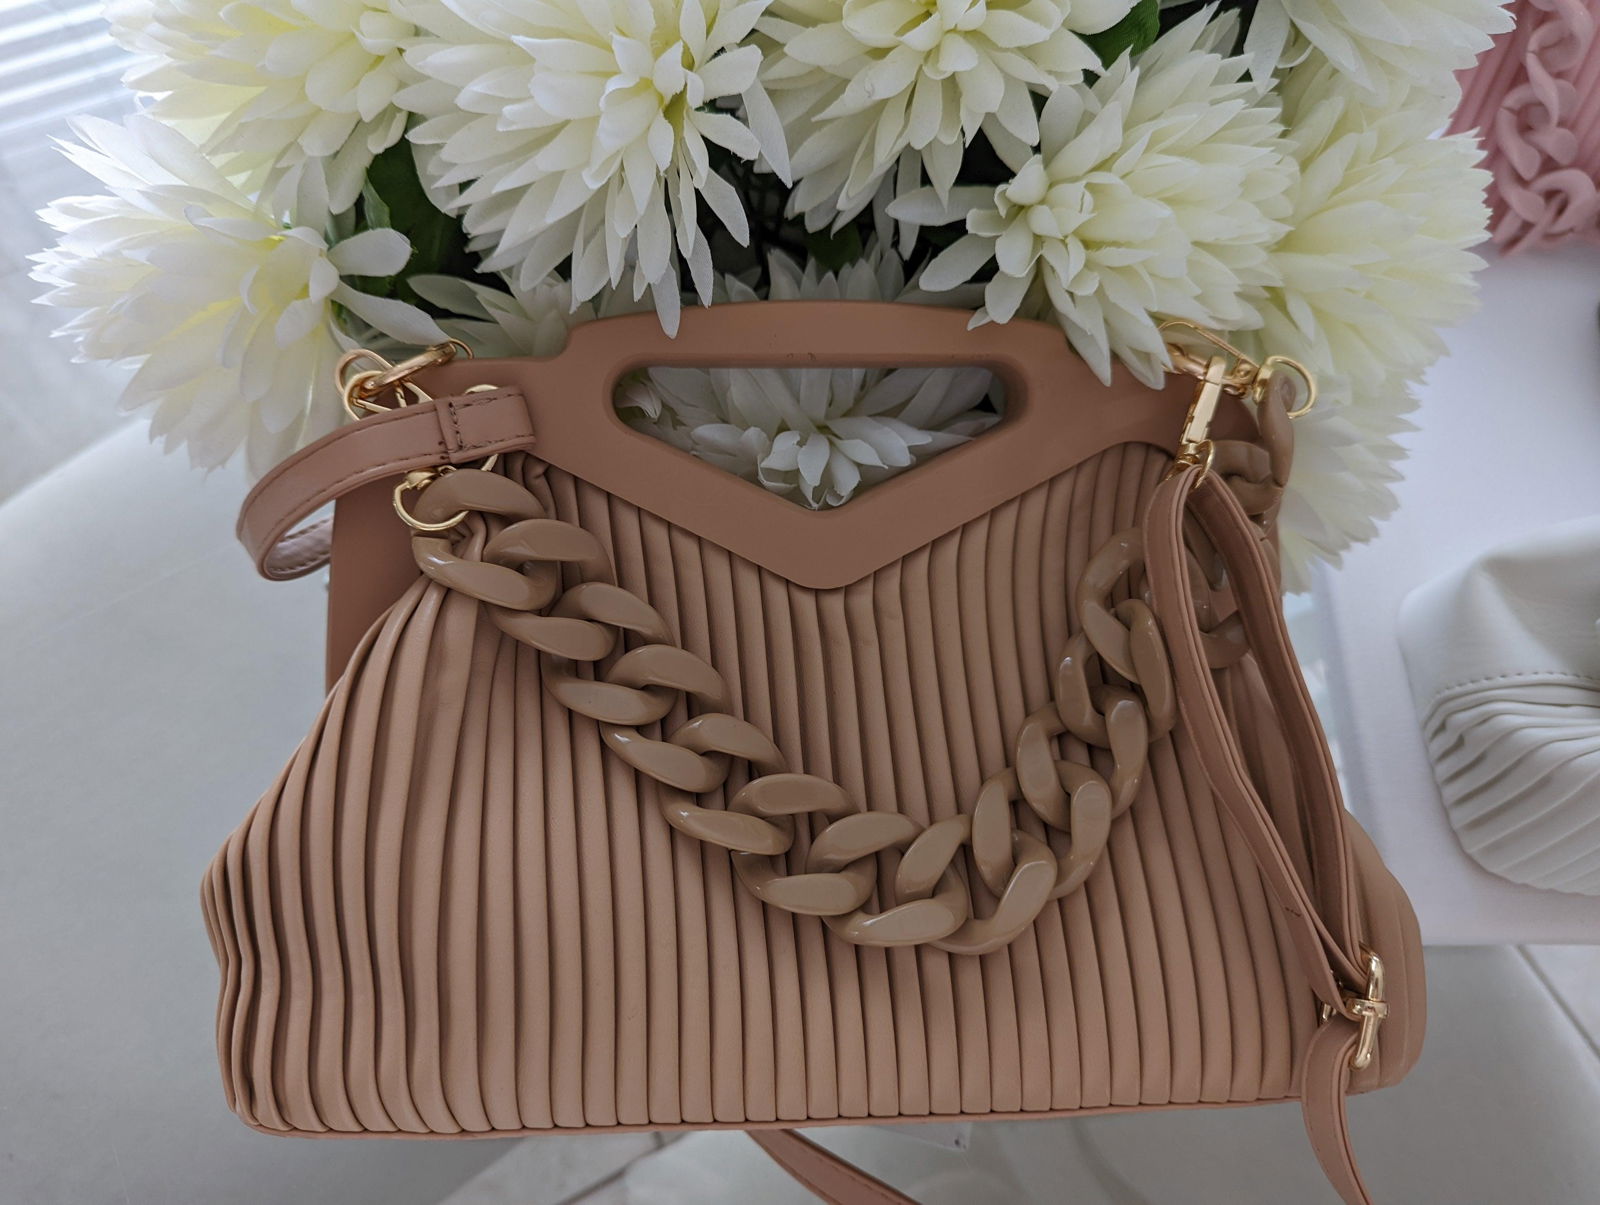 Pleated Handbag - Maily's Classic Accessories